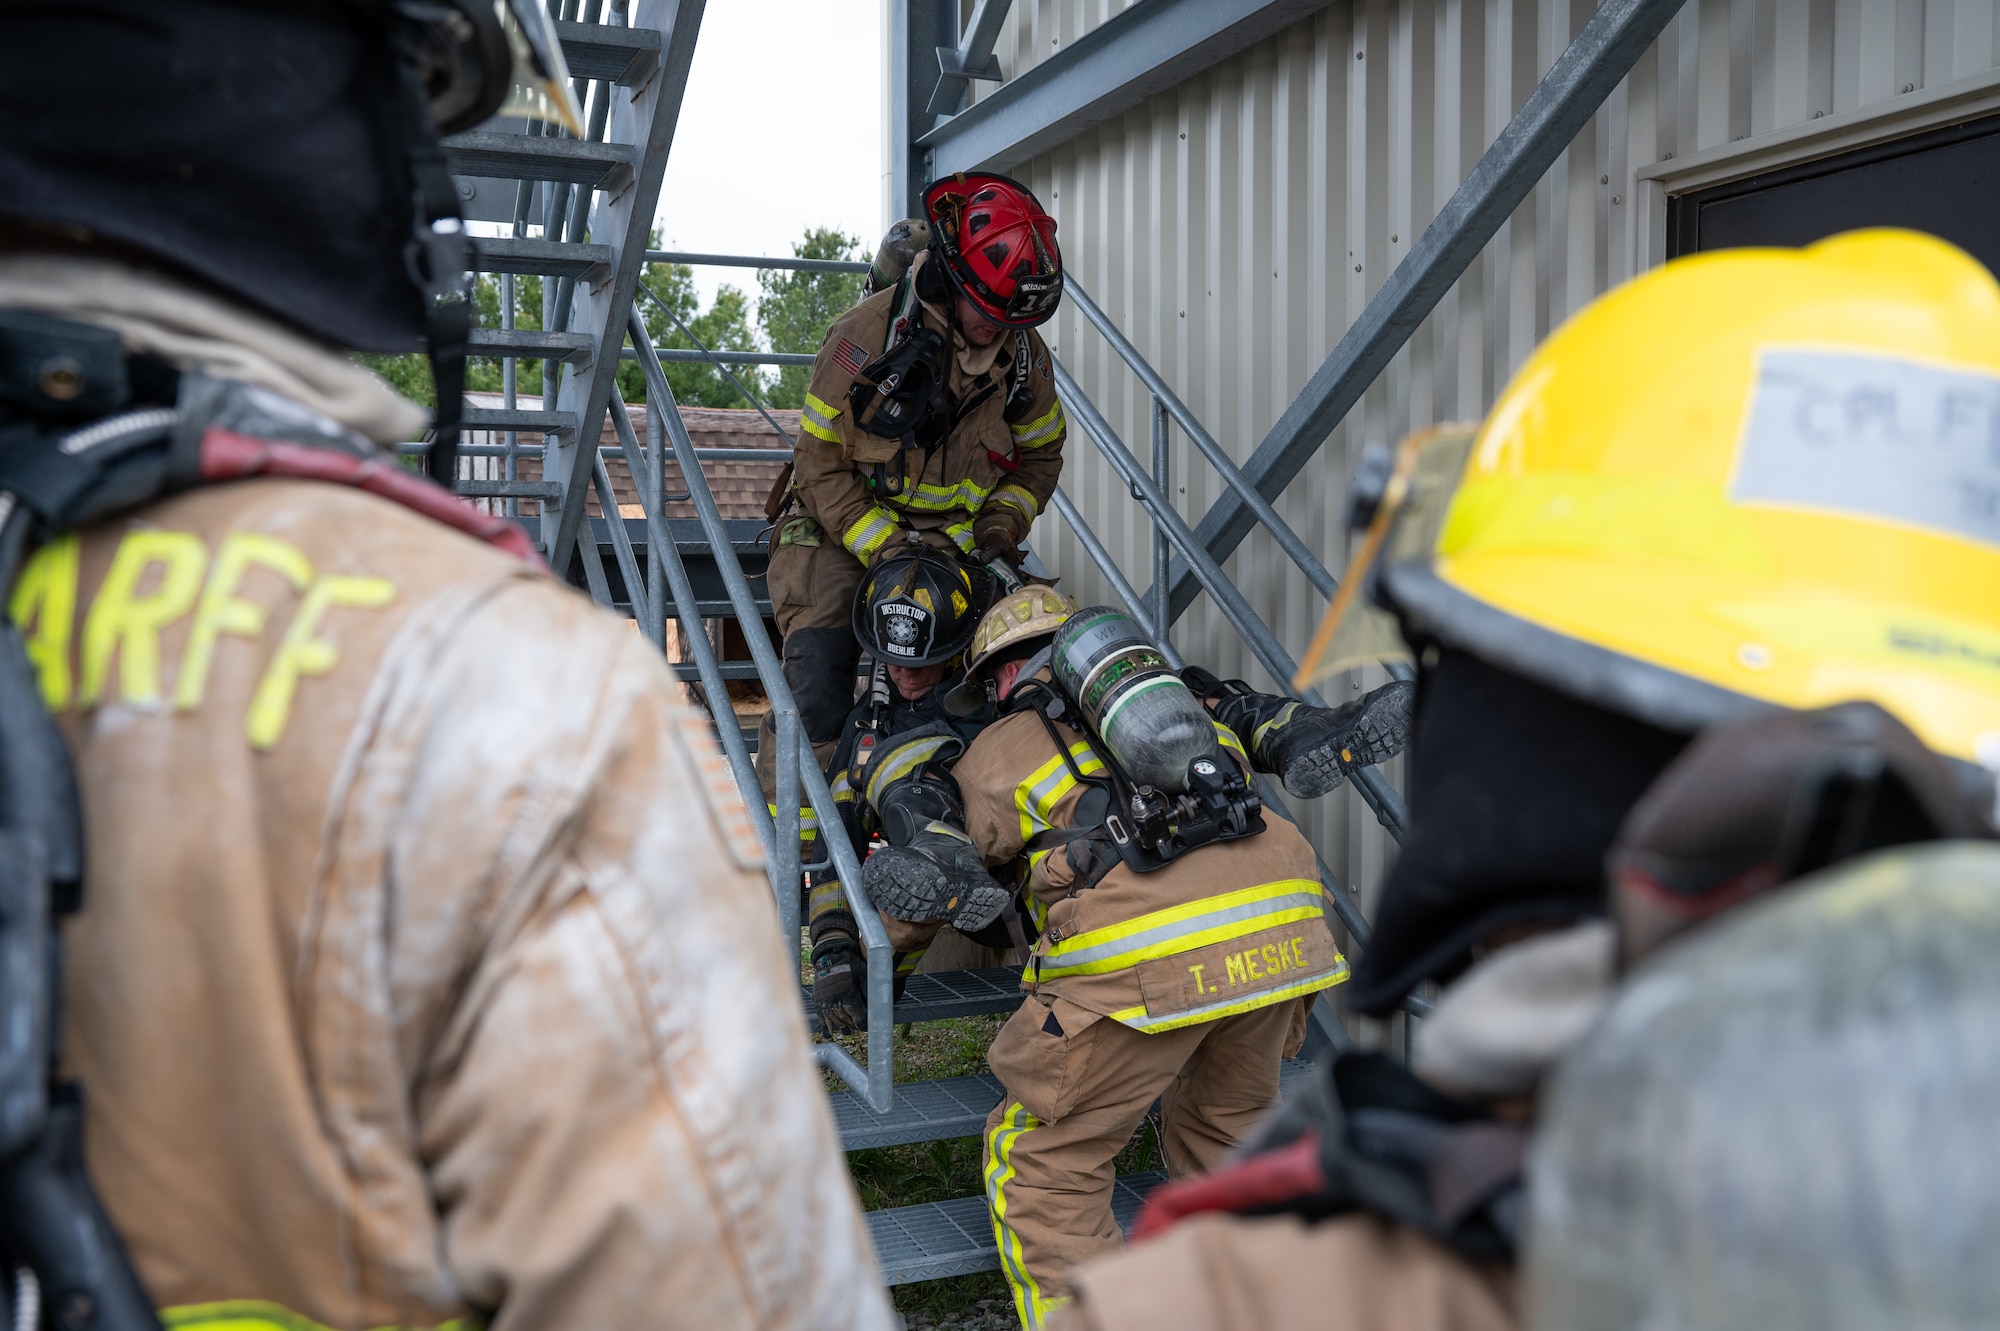 Firefighters in the foreground watch as firefighters in the background carry another firefighter, wearing a hat that says "Instructor", up a flight of stairs. The front three firefighters are instructors and the back two are students.